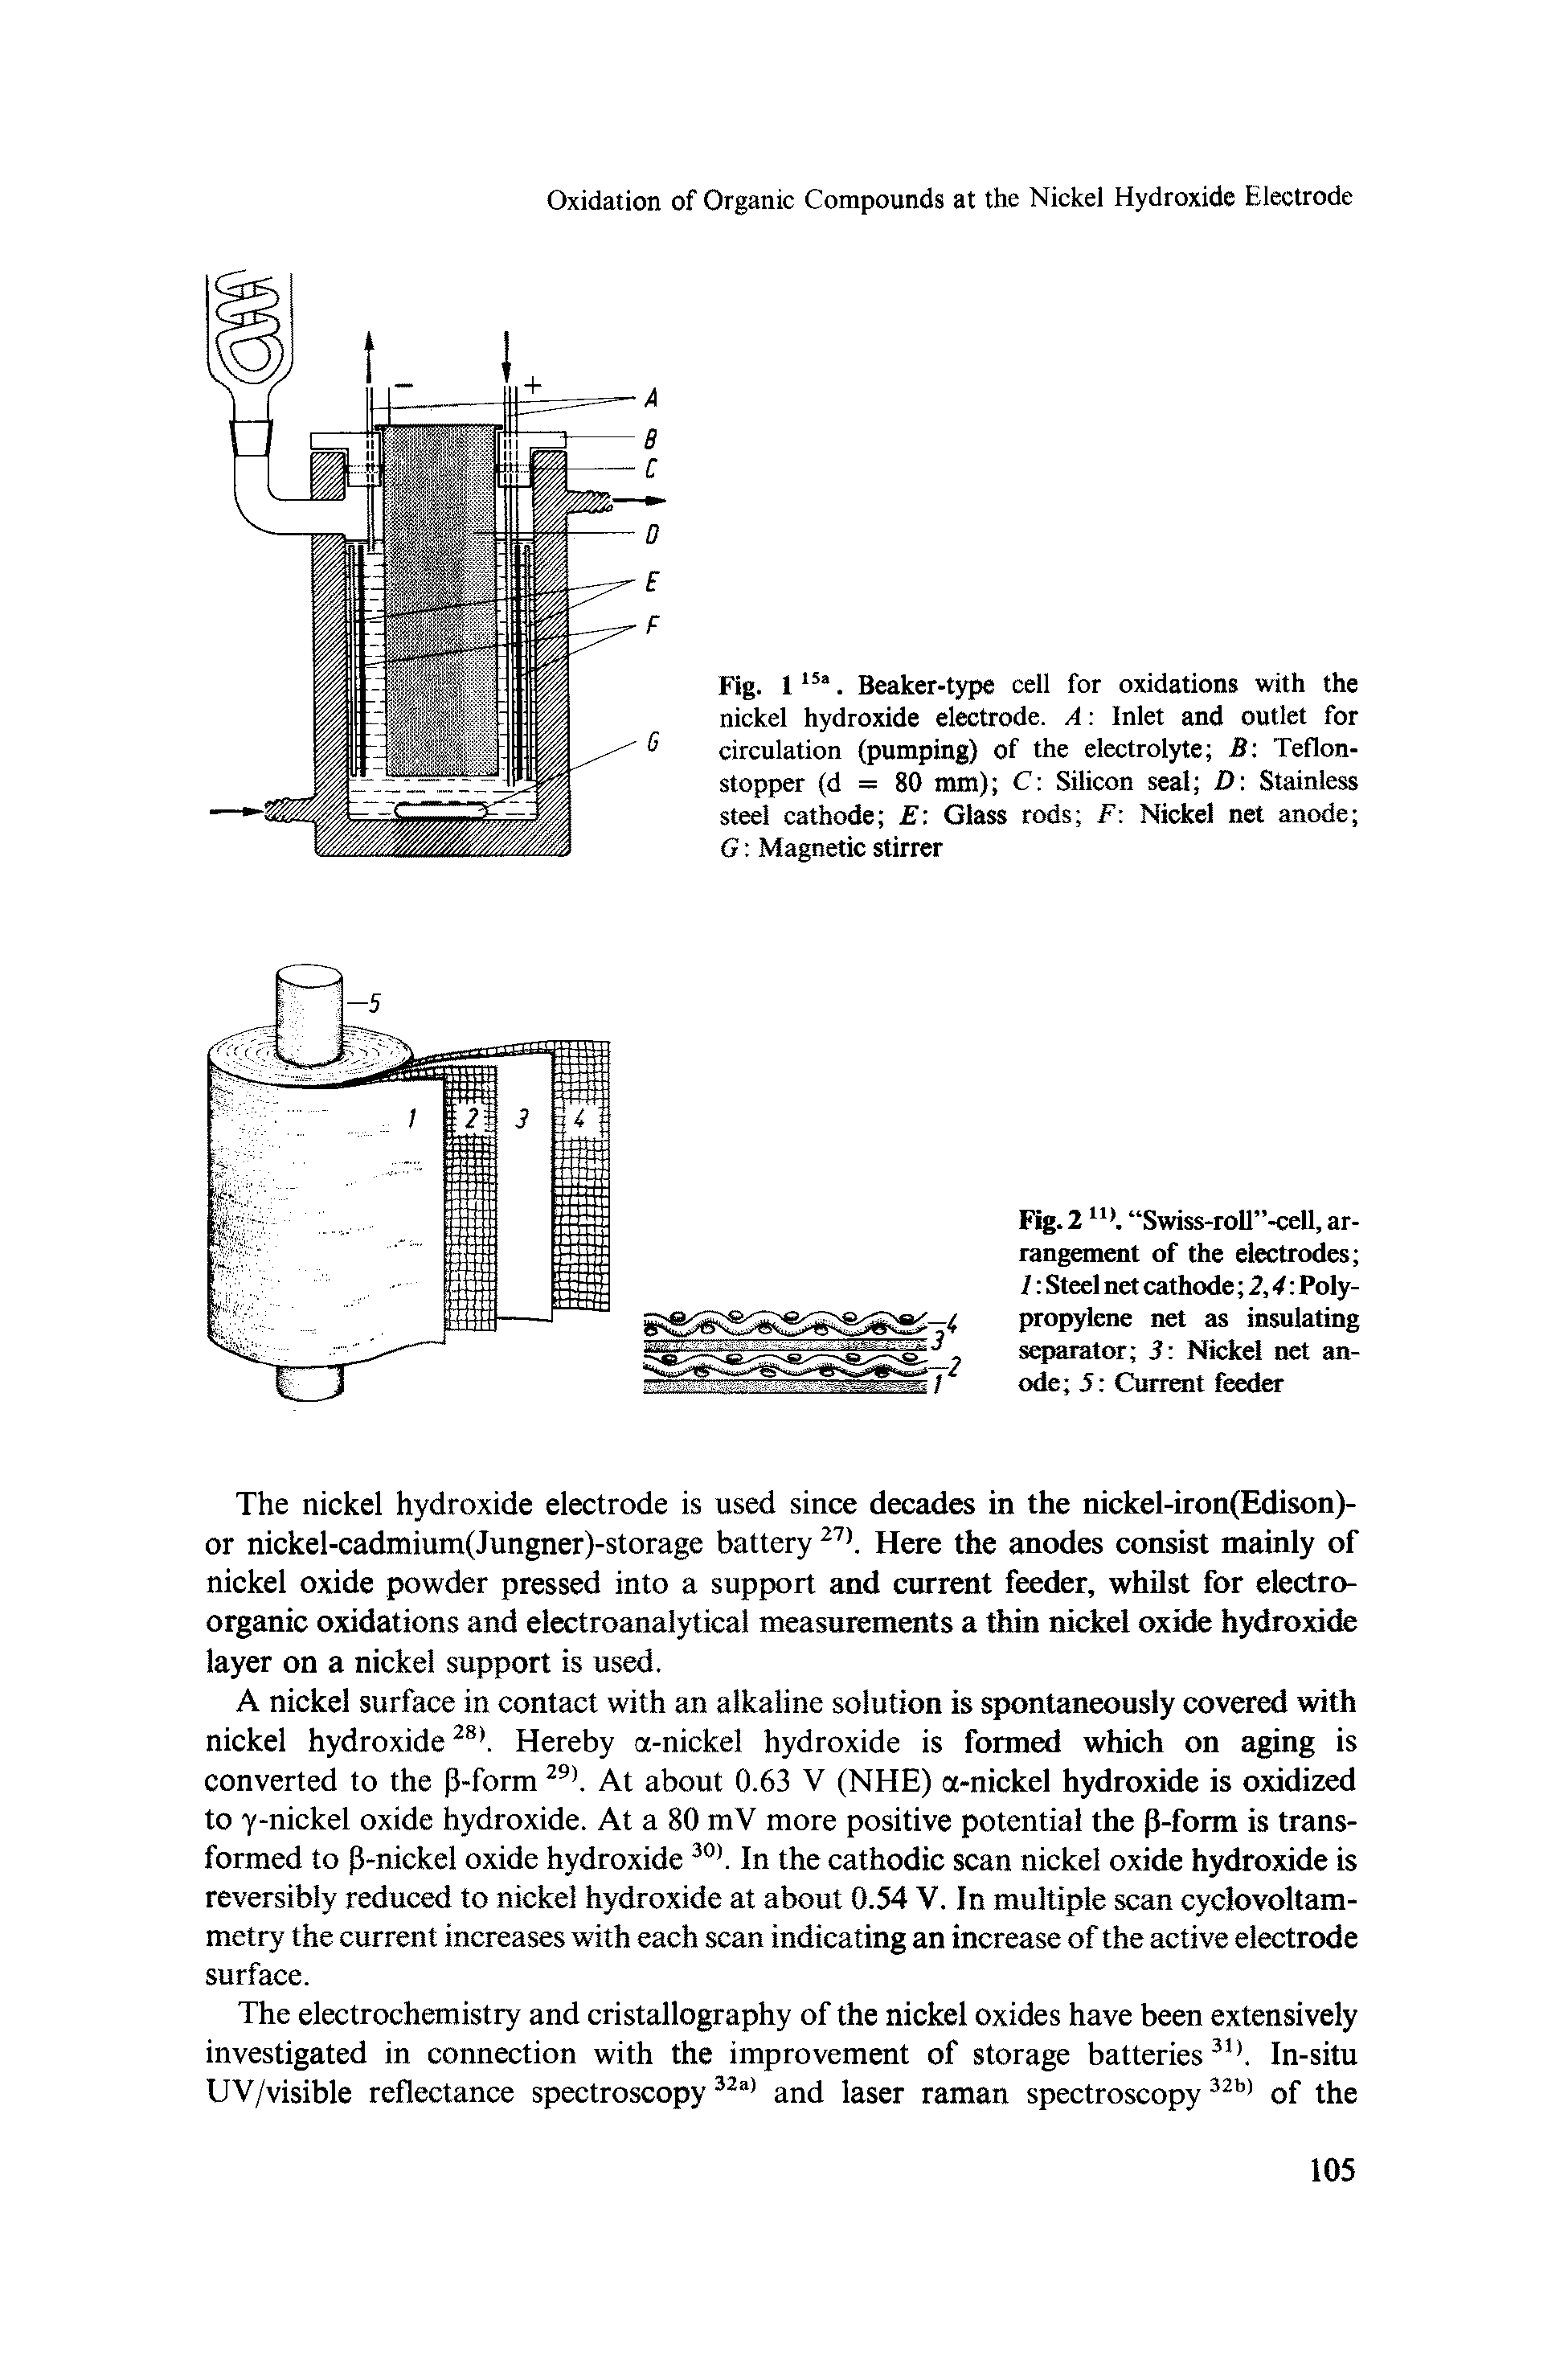 Fig. 1 5 . Beaker-type cell for oxidations with the nickel hydroxide electrode. A Inlet and outlet for circulation (pumping) of the electrolyte B Teflon-stopper (d = 80 nun) C Silicon seal D Stainless steel cathode E Glass rods F Nickel net anode G Magnetic stirrer...